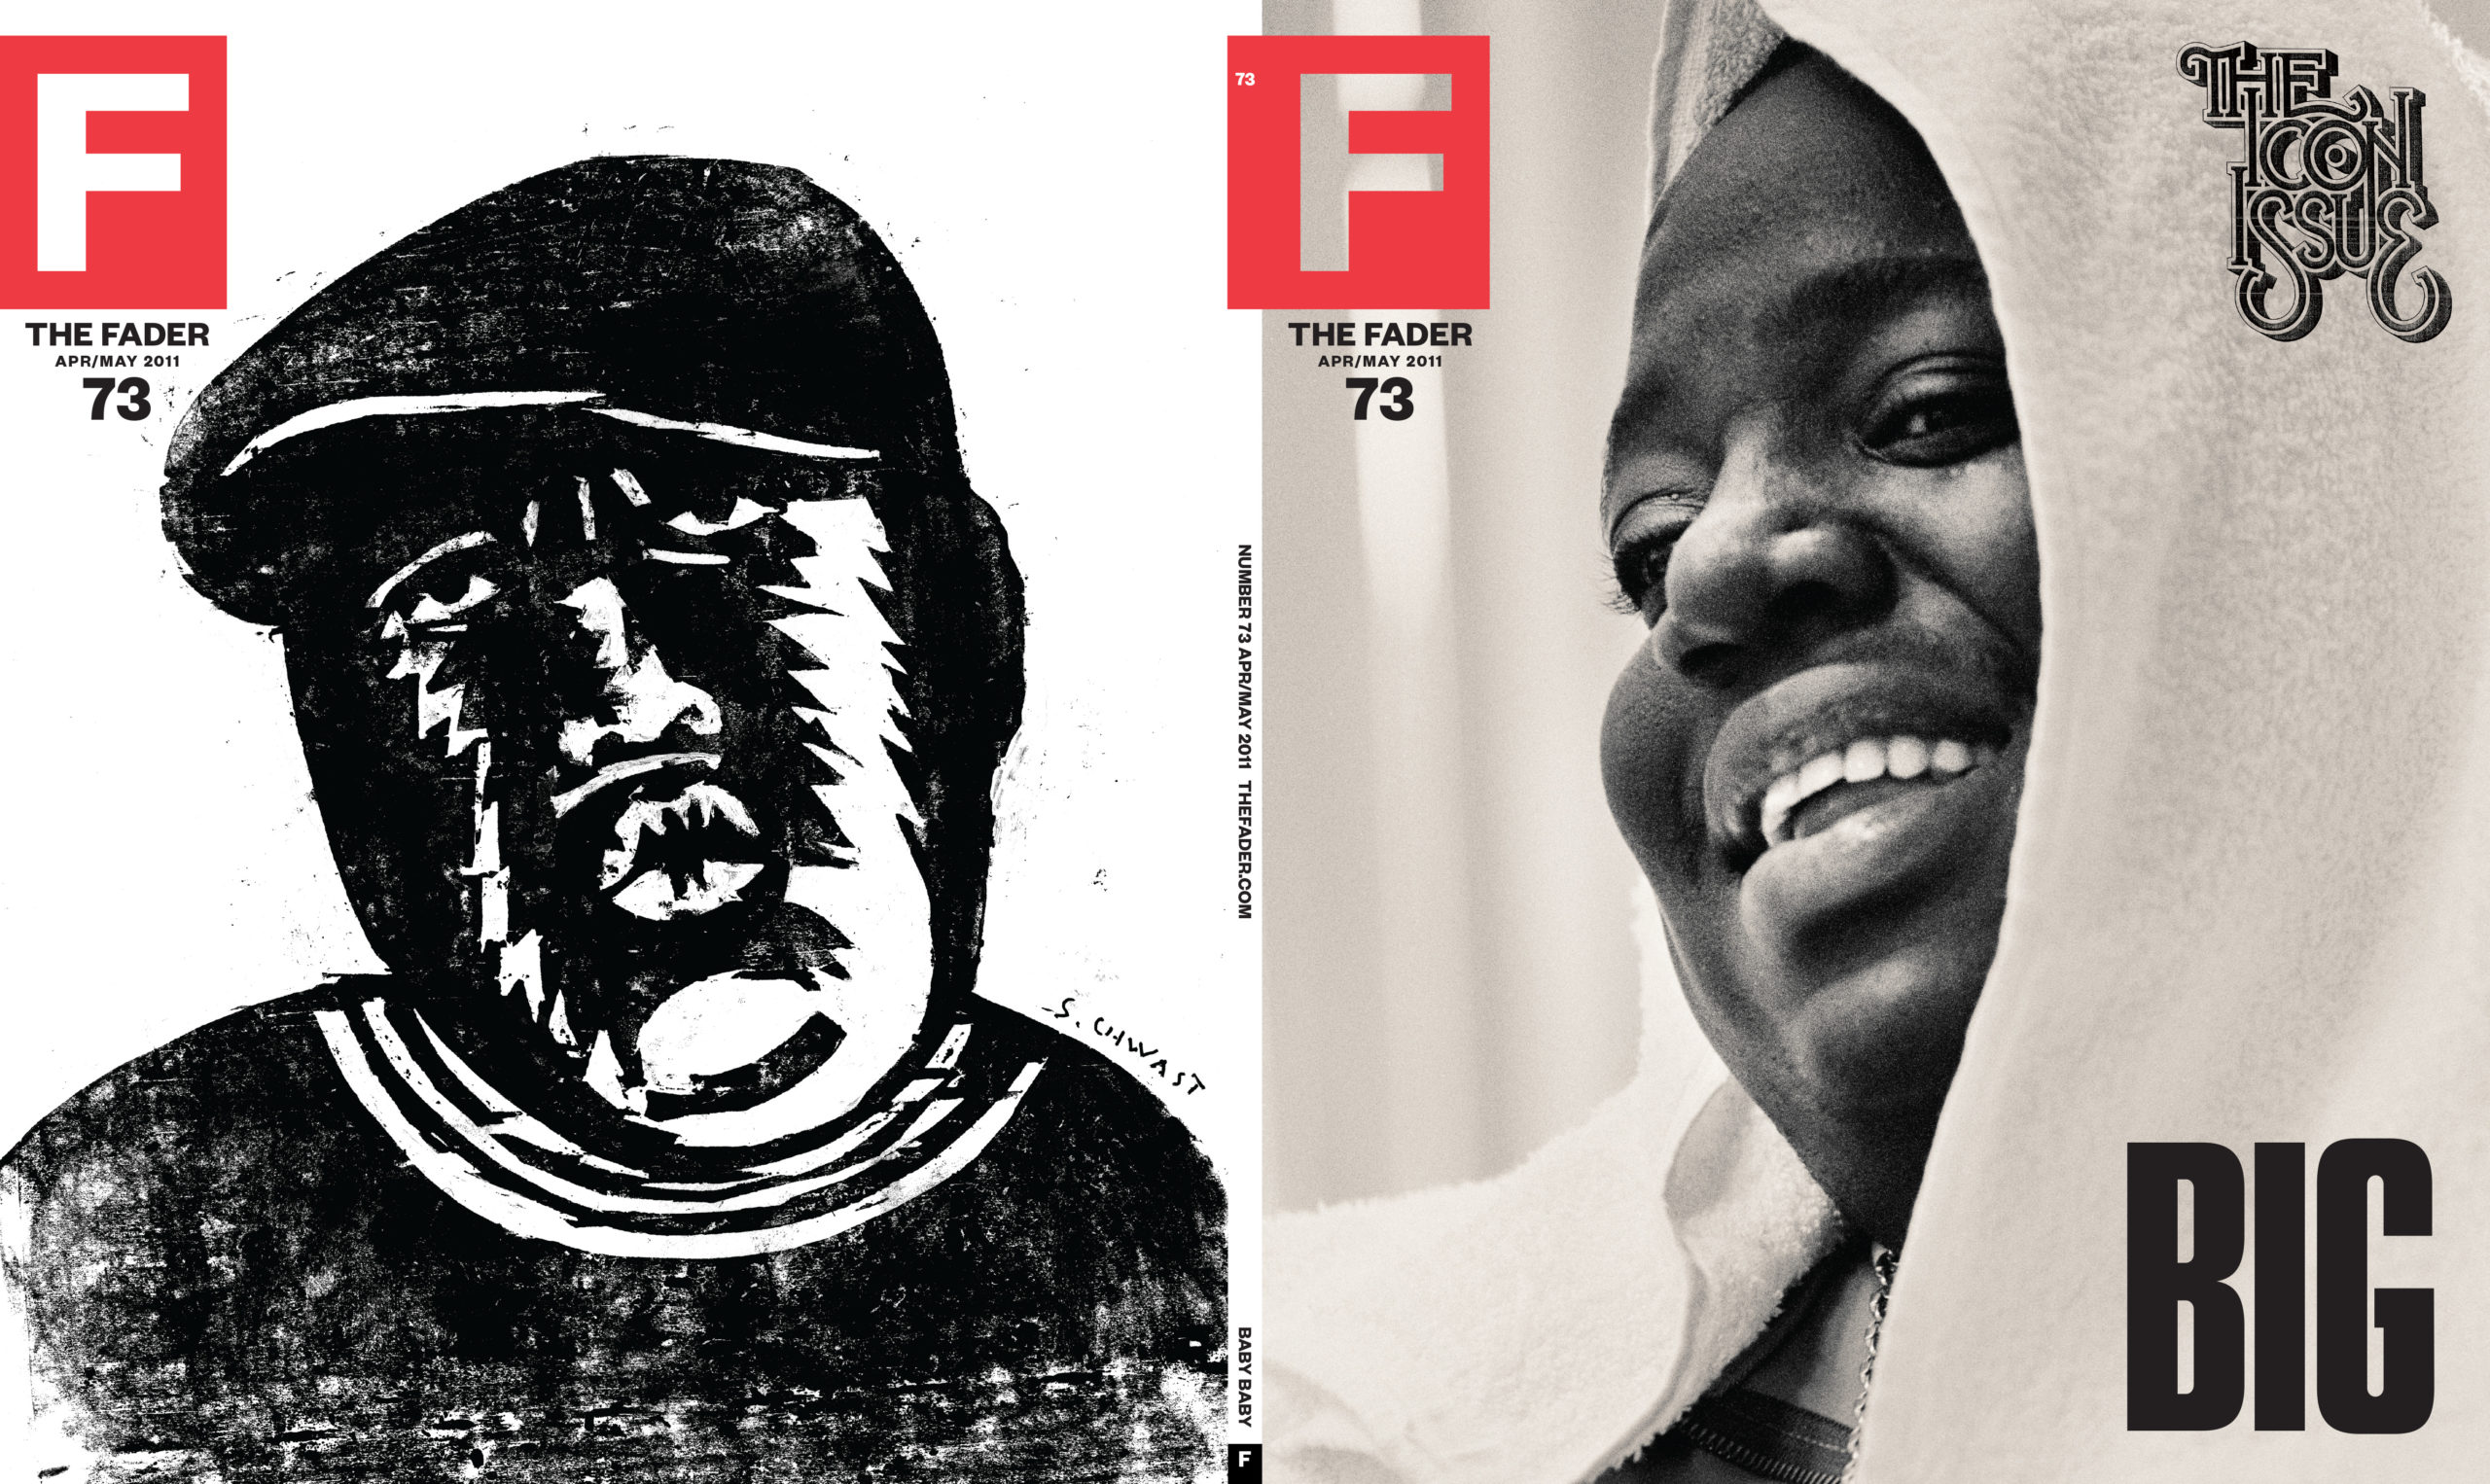 01_Cover41_Fader73